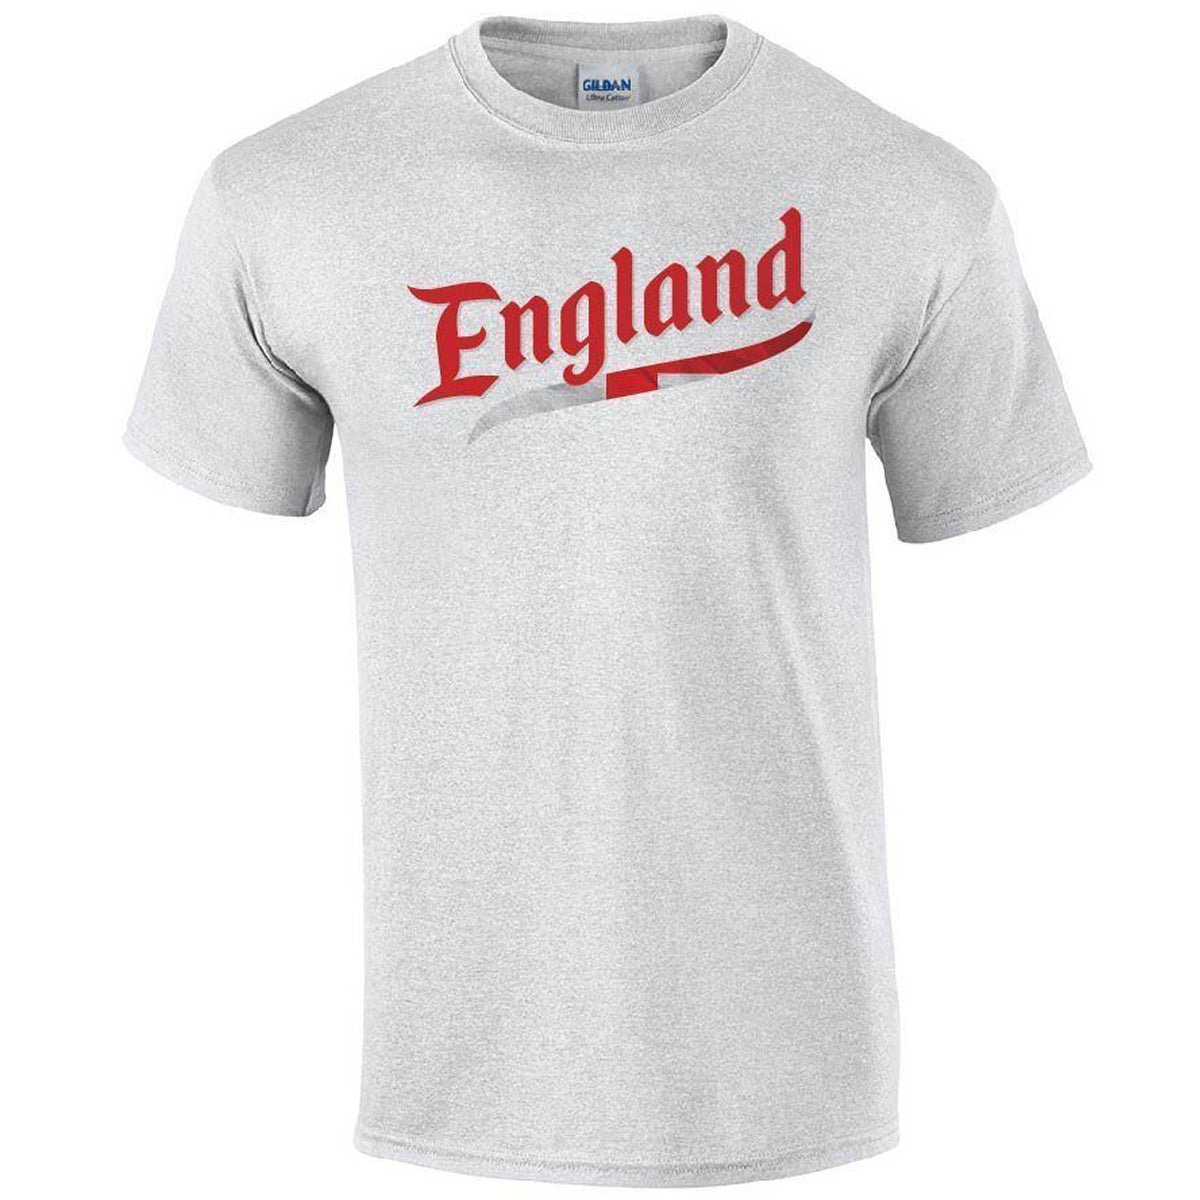 England Script World Cup 2022 Printed Tee T-shirts 411 Youth Medium Ash Youth